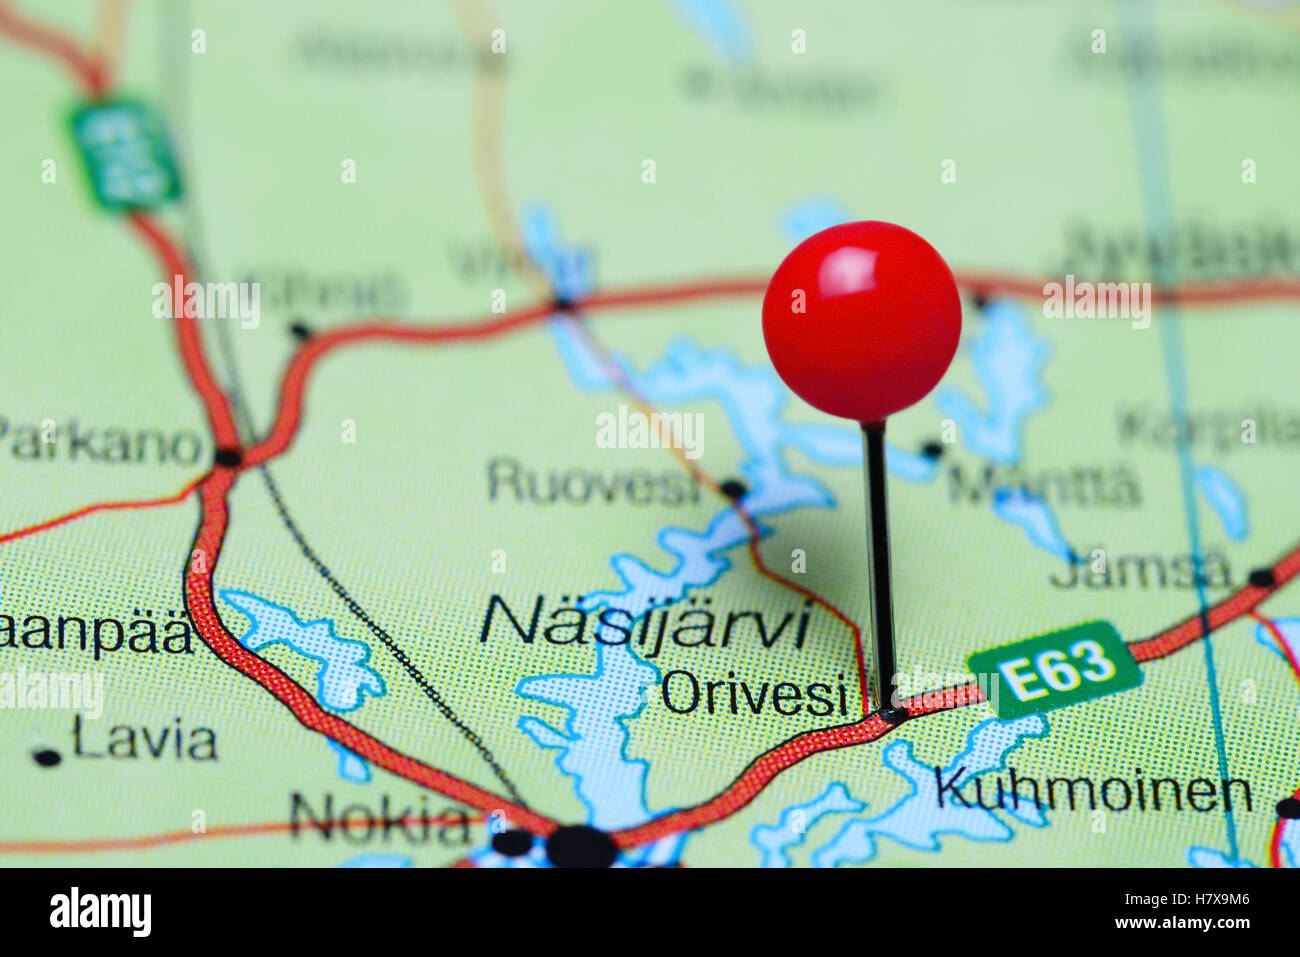 Orivesi pinned on a map of Finland Stock Photo